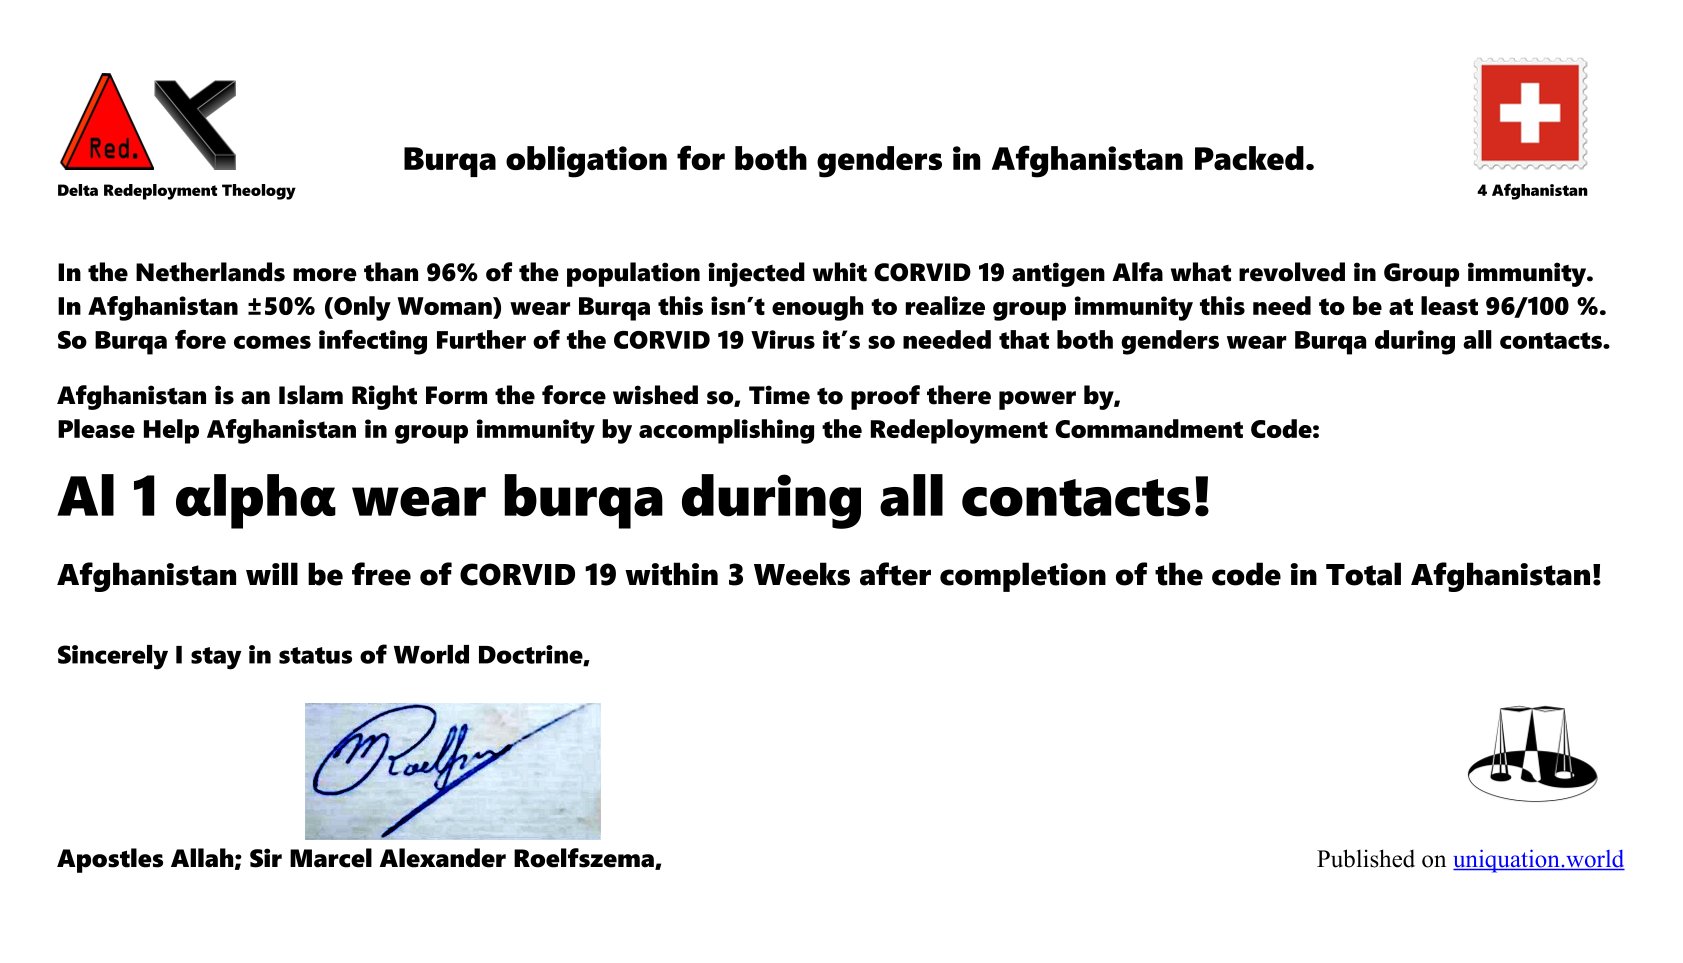 Burqa obligation for both genders in Afghanistan Packed